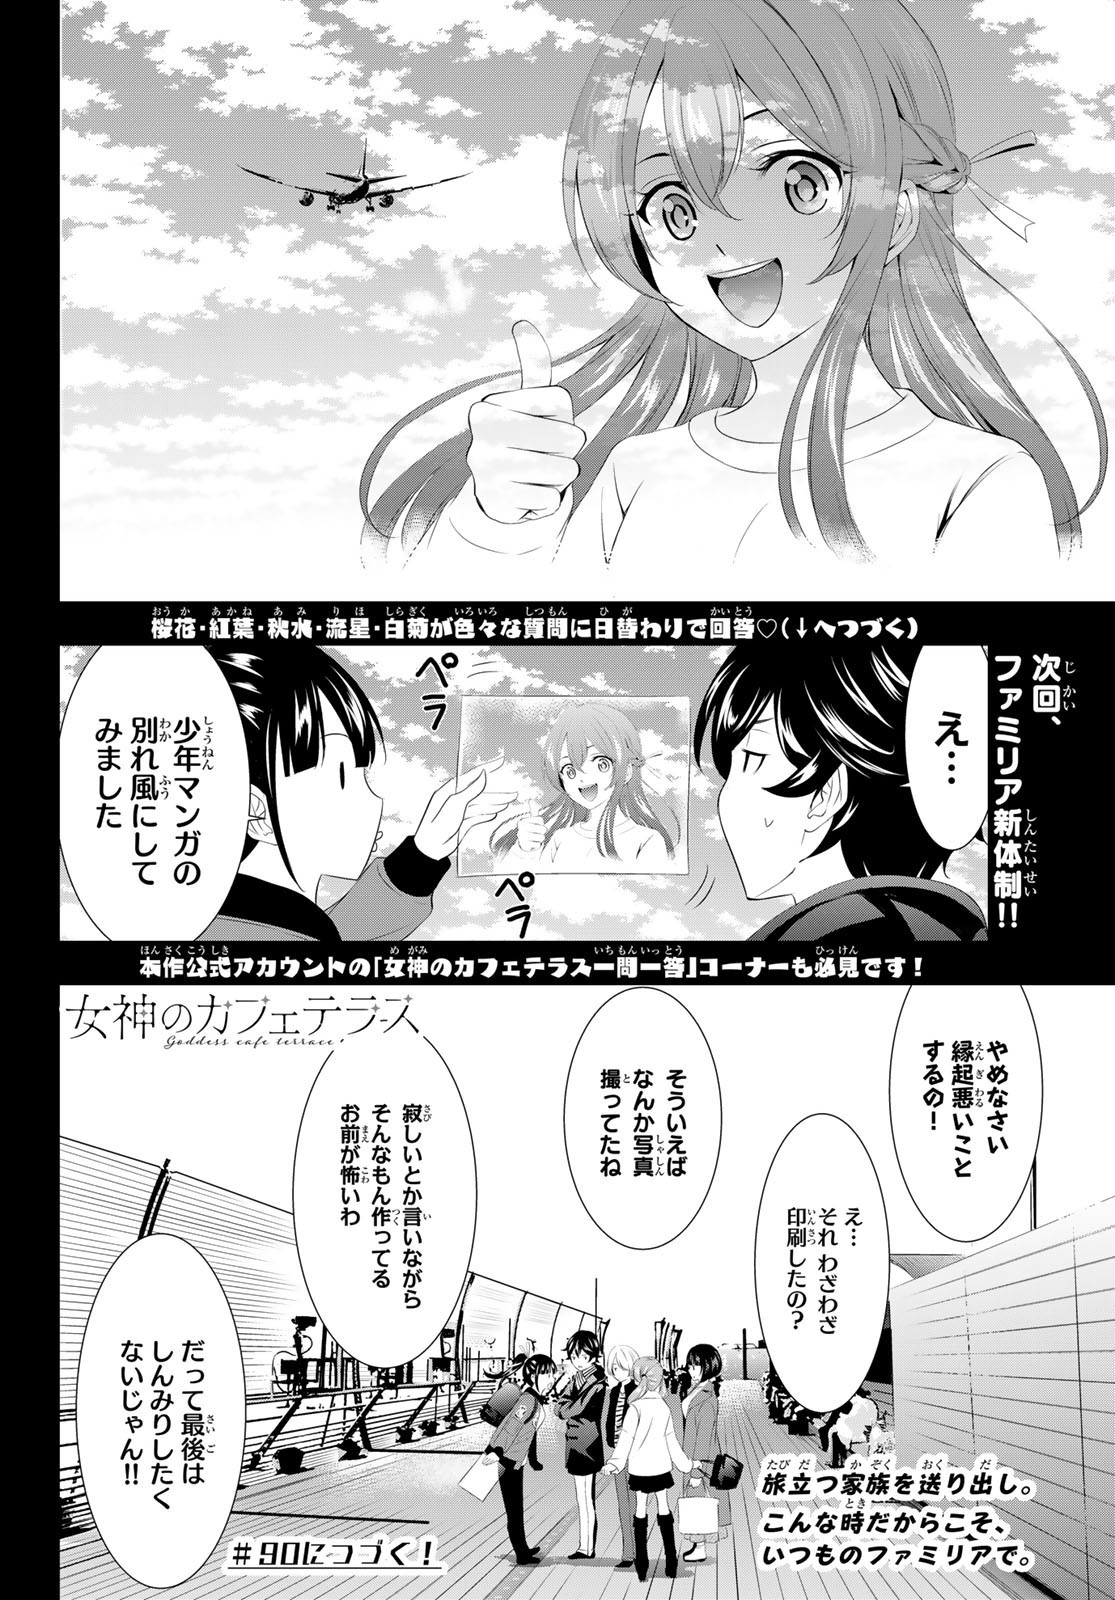 Goddess-Cafe-Terrace - Chapter 089 - Page 18